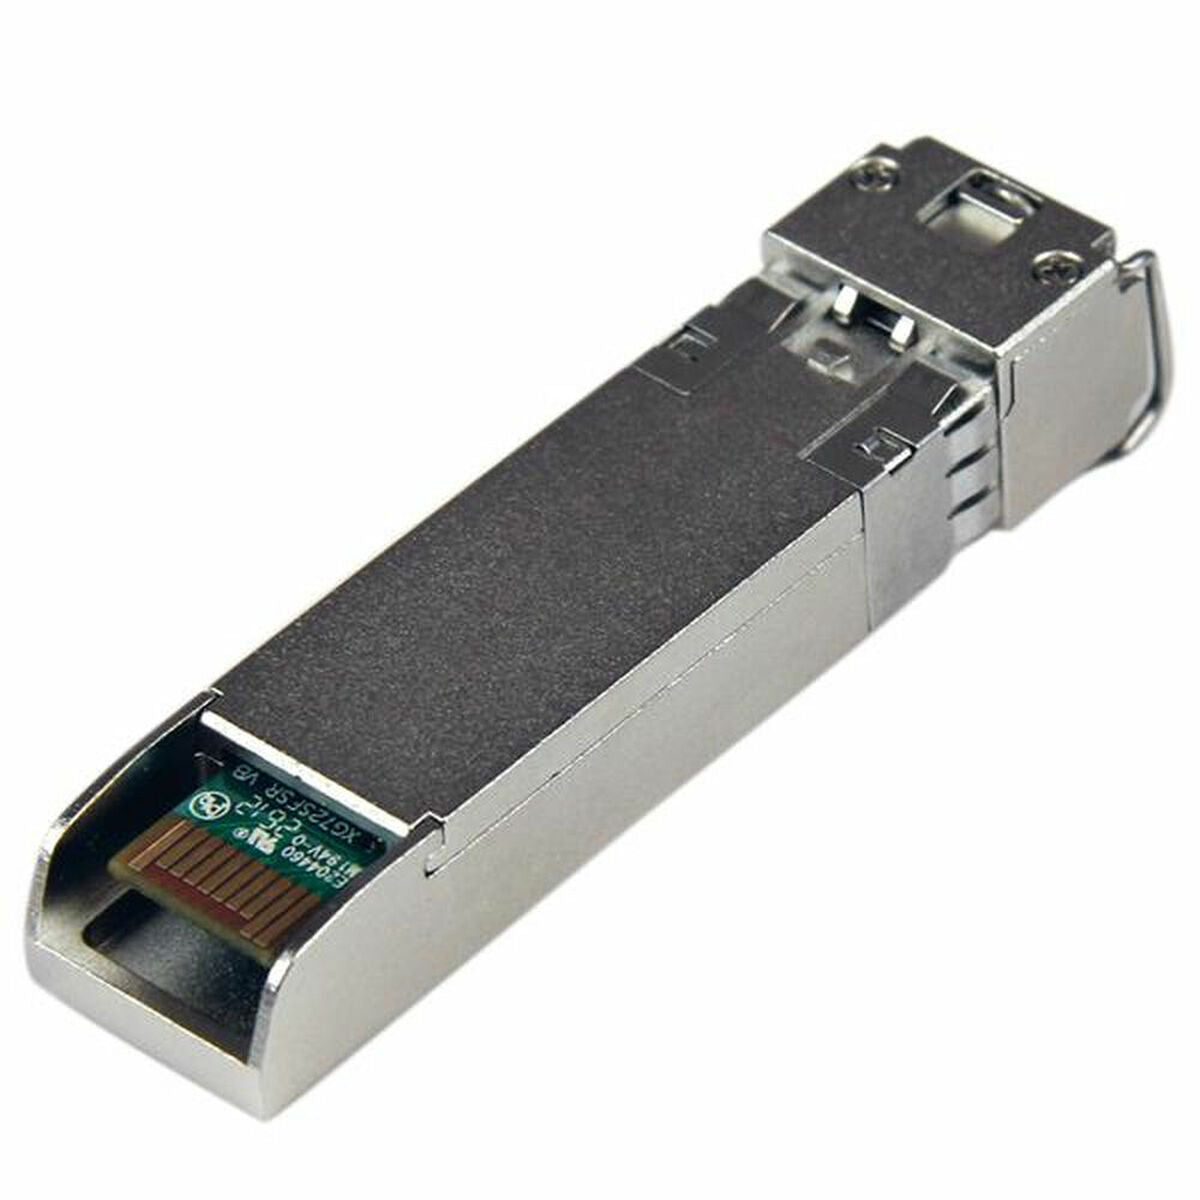 MultiMode SFP+ Fibre Module Startech SFP10GBLRST, Startech, Computing, Network devices, multimode-sfp-fibre-module-startech-sfp10gblrst, Brand_Startech, category-reference-2609, category-reference-2803, category-reference-2821, category-reference-t-19685, category-reference-t-19914, Condition_NEW, networks/wiring, Price_50 - 100, Teleworking, RiotNook